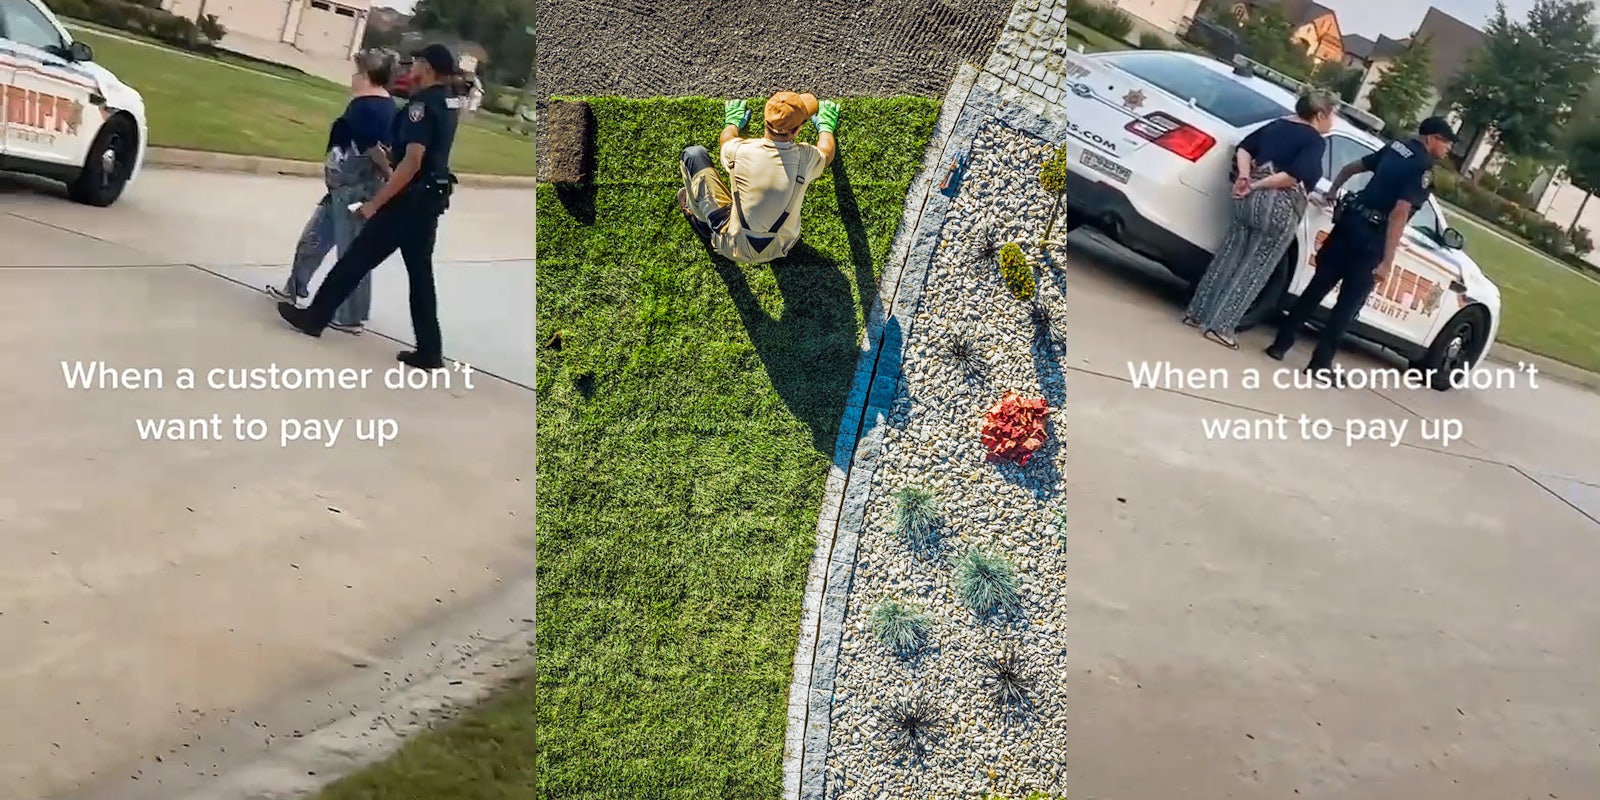 woman in handcuffs police officer walking her across the street caption 'When a customer don't want to pay up' (l) landscaper rolling rolls of sod (c) woman in cuffs and police officer at police car caption 'When a customer don't want to pay up' (r)